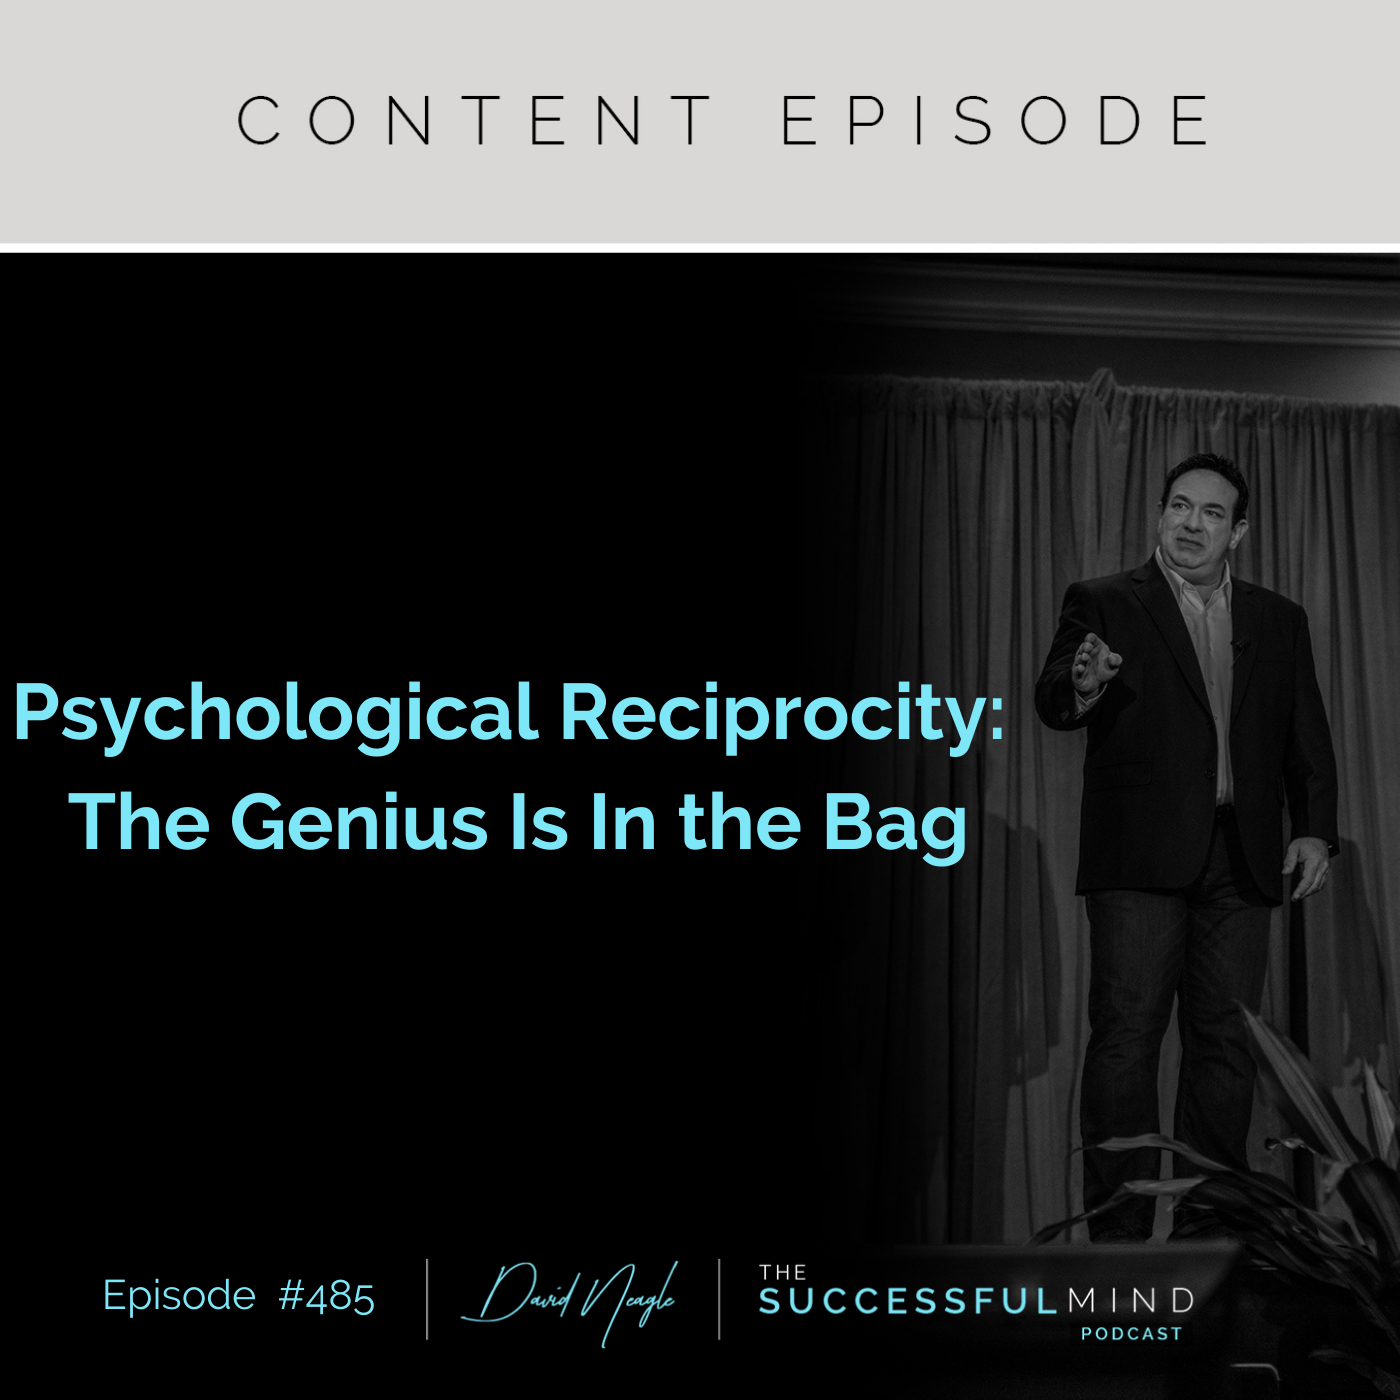 The Successful Mind Podcast – Episode 485 – Psychological Reciprocity: The Genius Is In the Bag